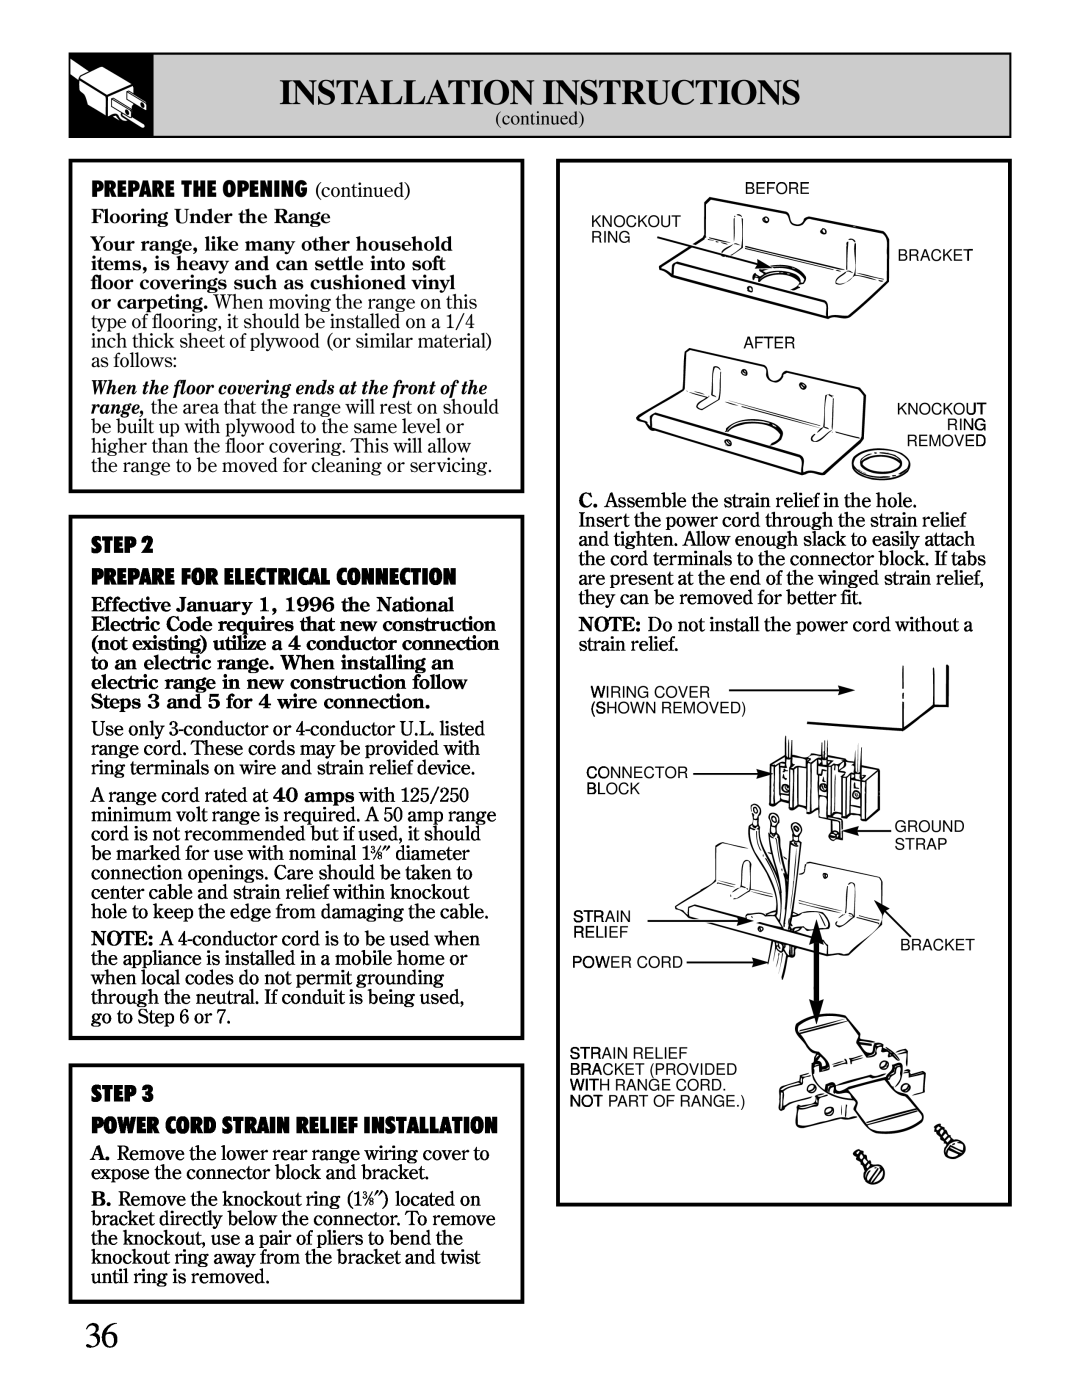 GE 10-95 CG warranty PREPARE THE OPENING continued, Step, Prepare For Electrical Connection, Installation Instructions 